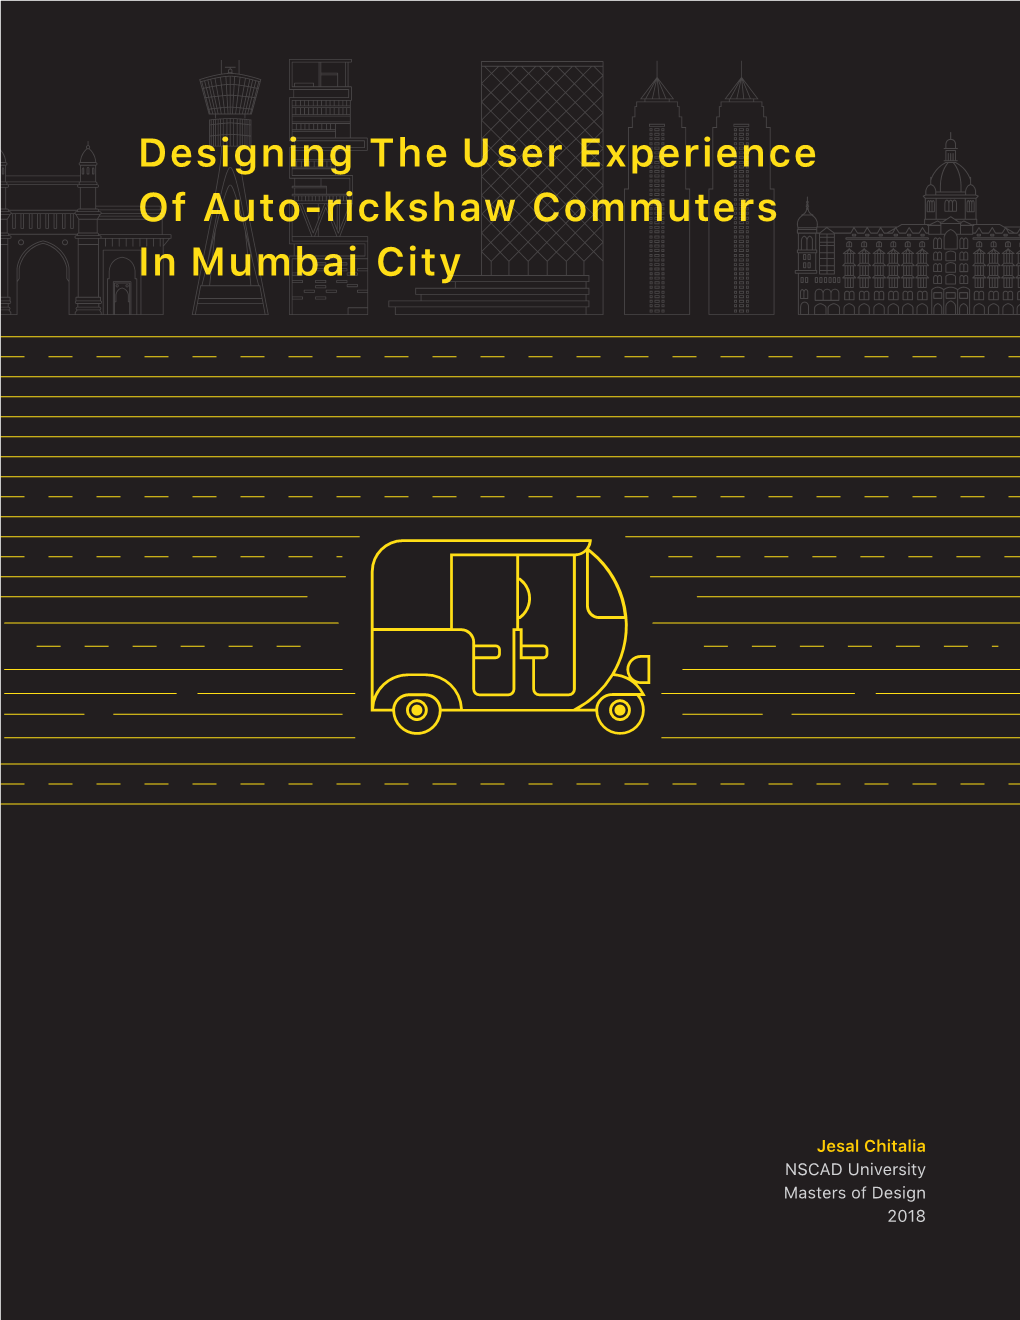 Designing the User Experience of Auto-Rickshaw Commuters in Mumbai City